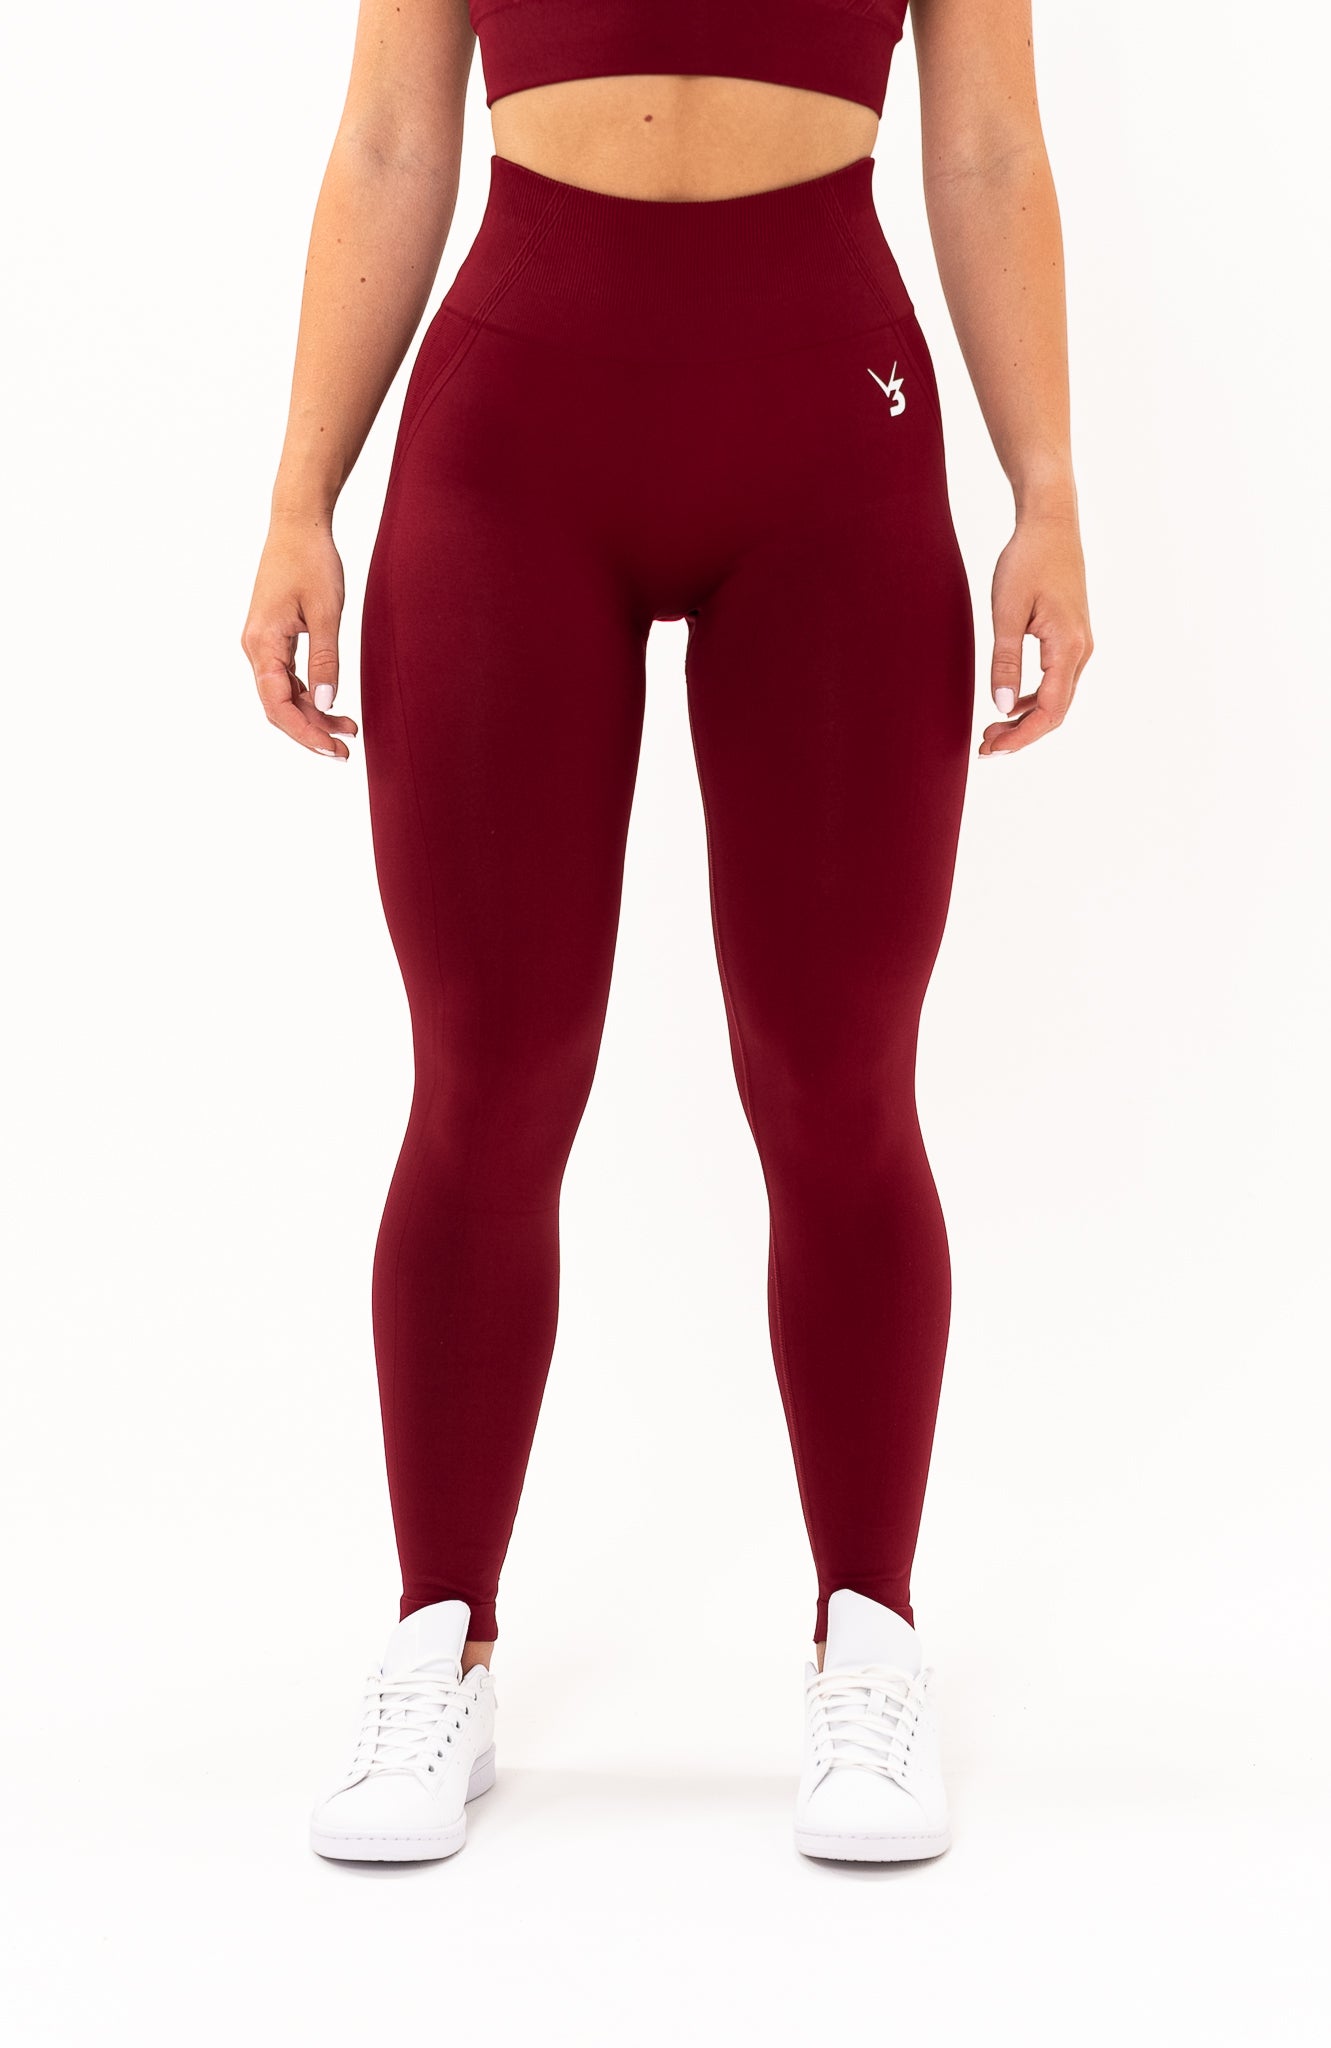 V3 Apparel Women's Tempo seamless scrunch bum shaping high waisted leggings in burgundy red – Squat proof sports tights for Gym workouts training, Running, yoga, bodybuilding and bikini fitness.